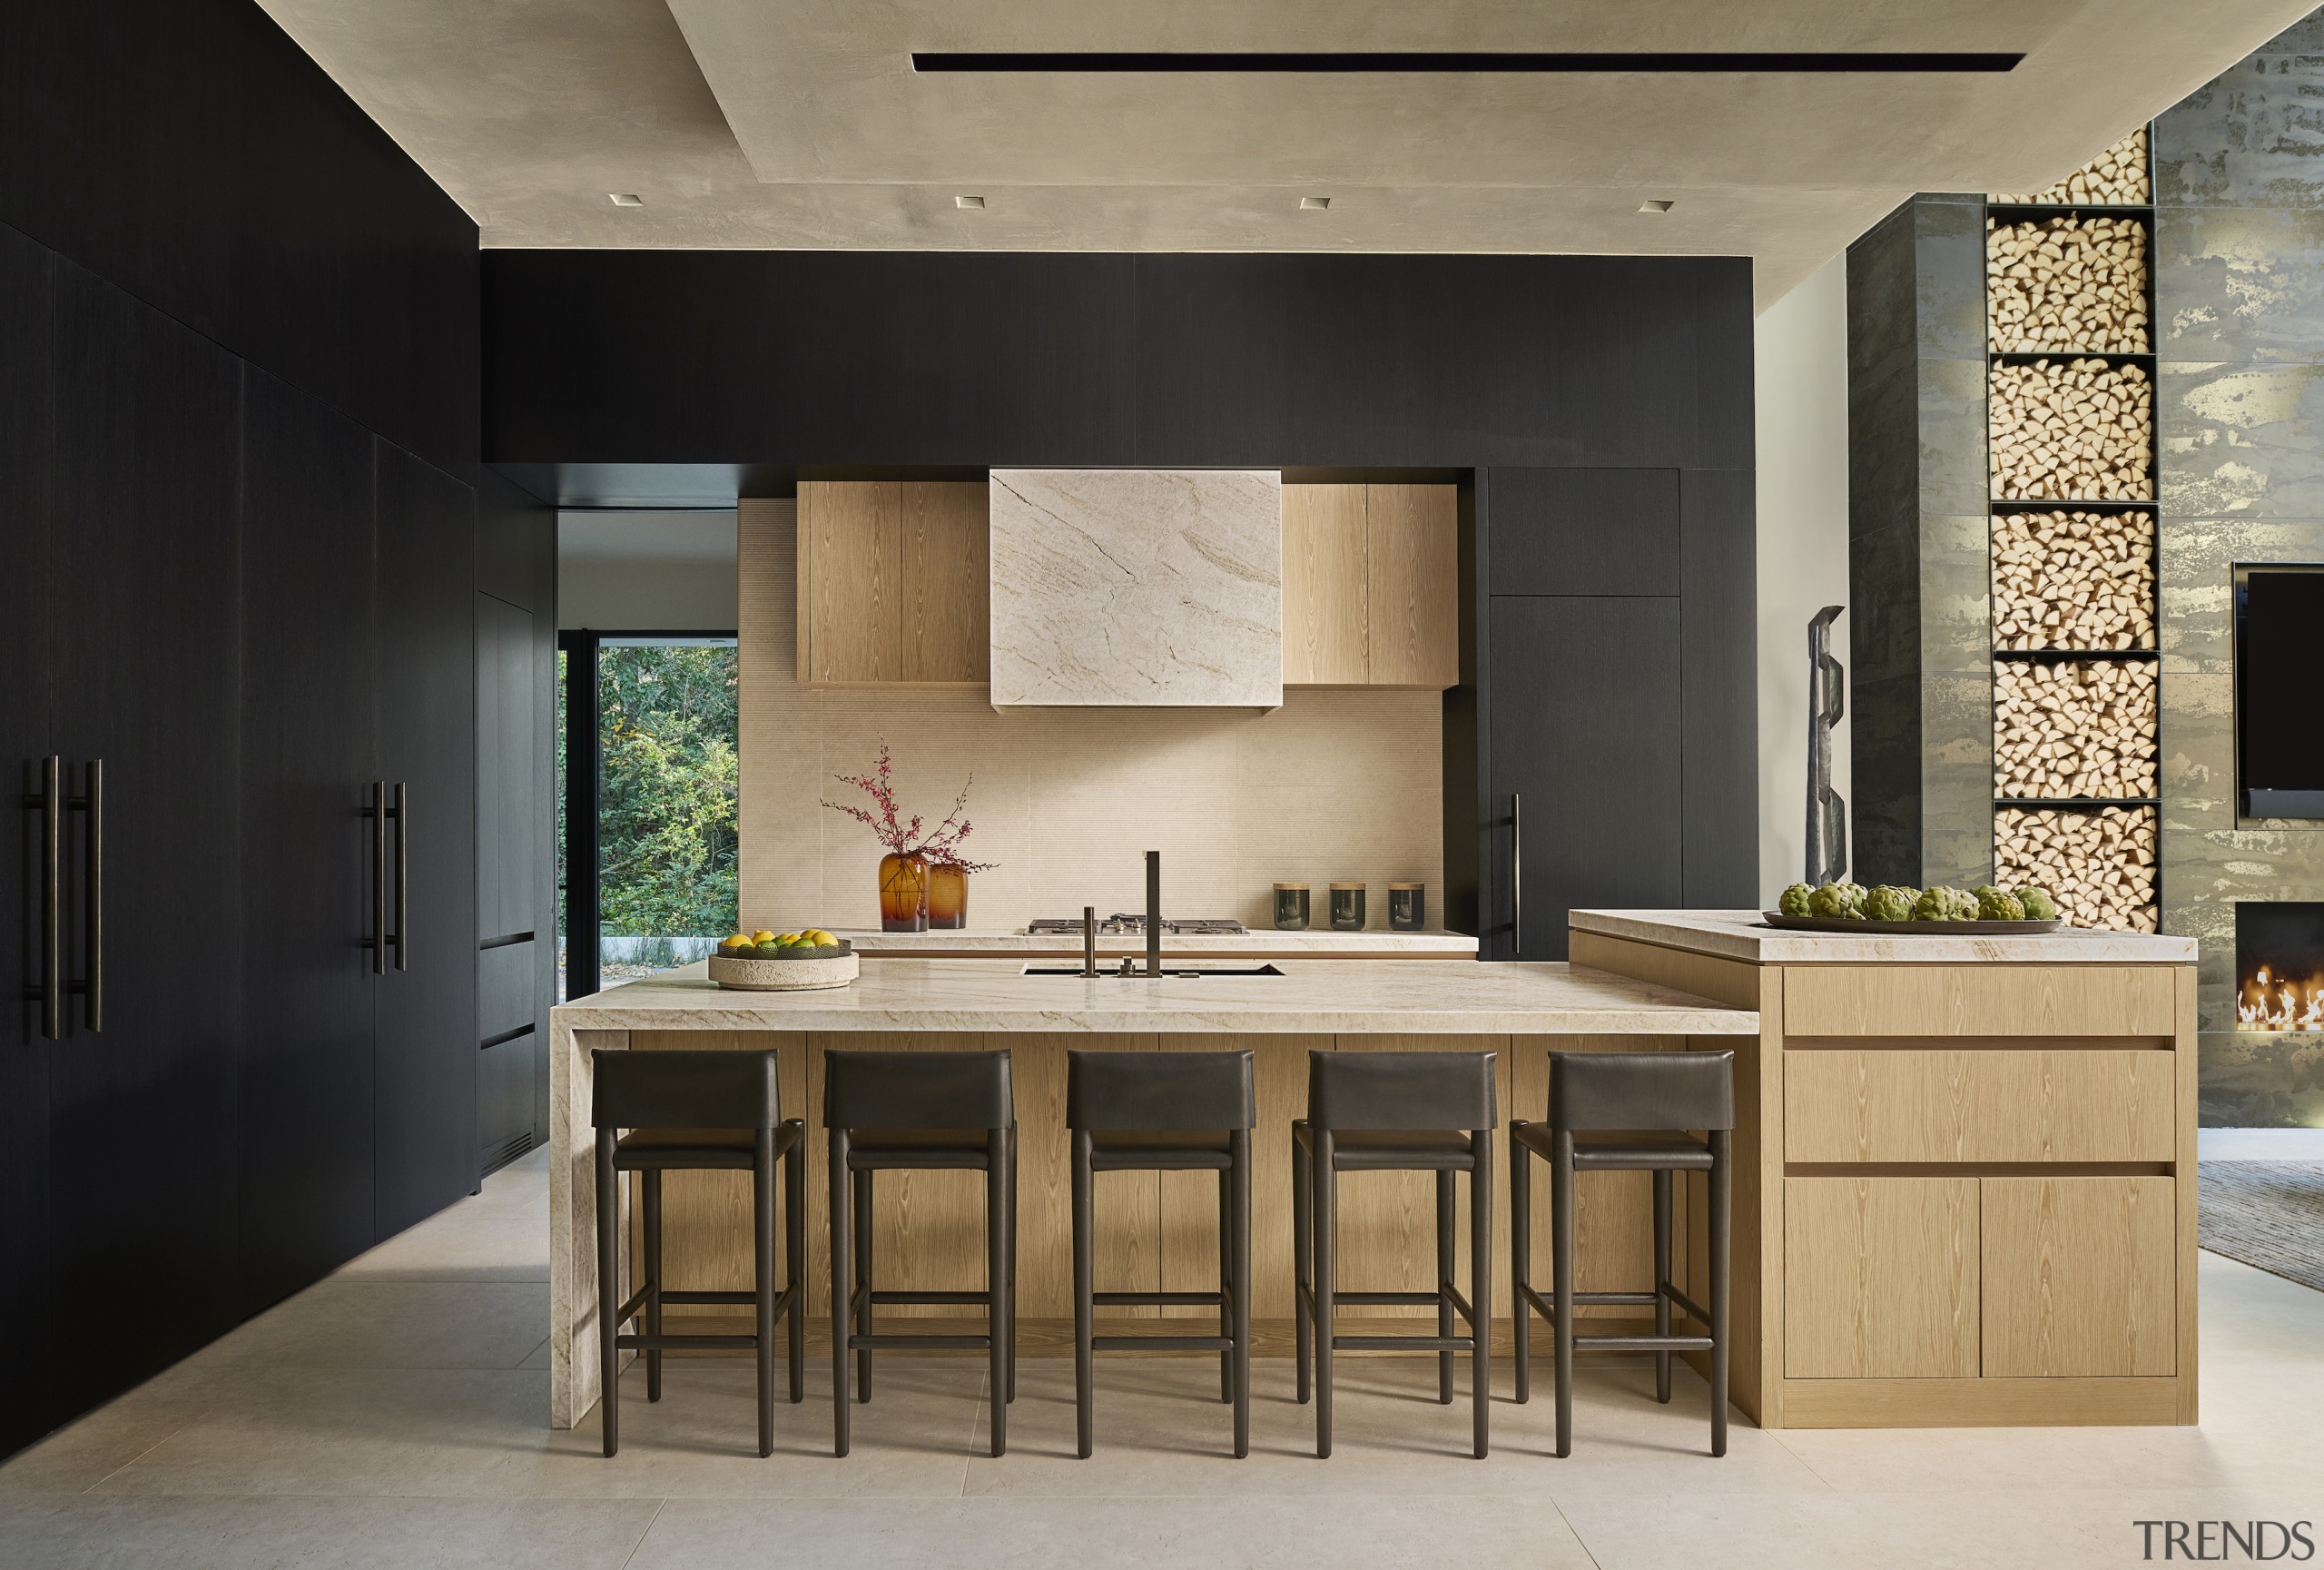 For durable kitchen work surfaces, leathered natural quartzite 